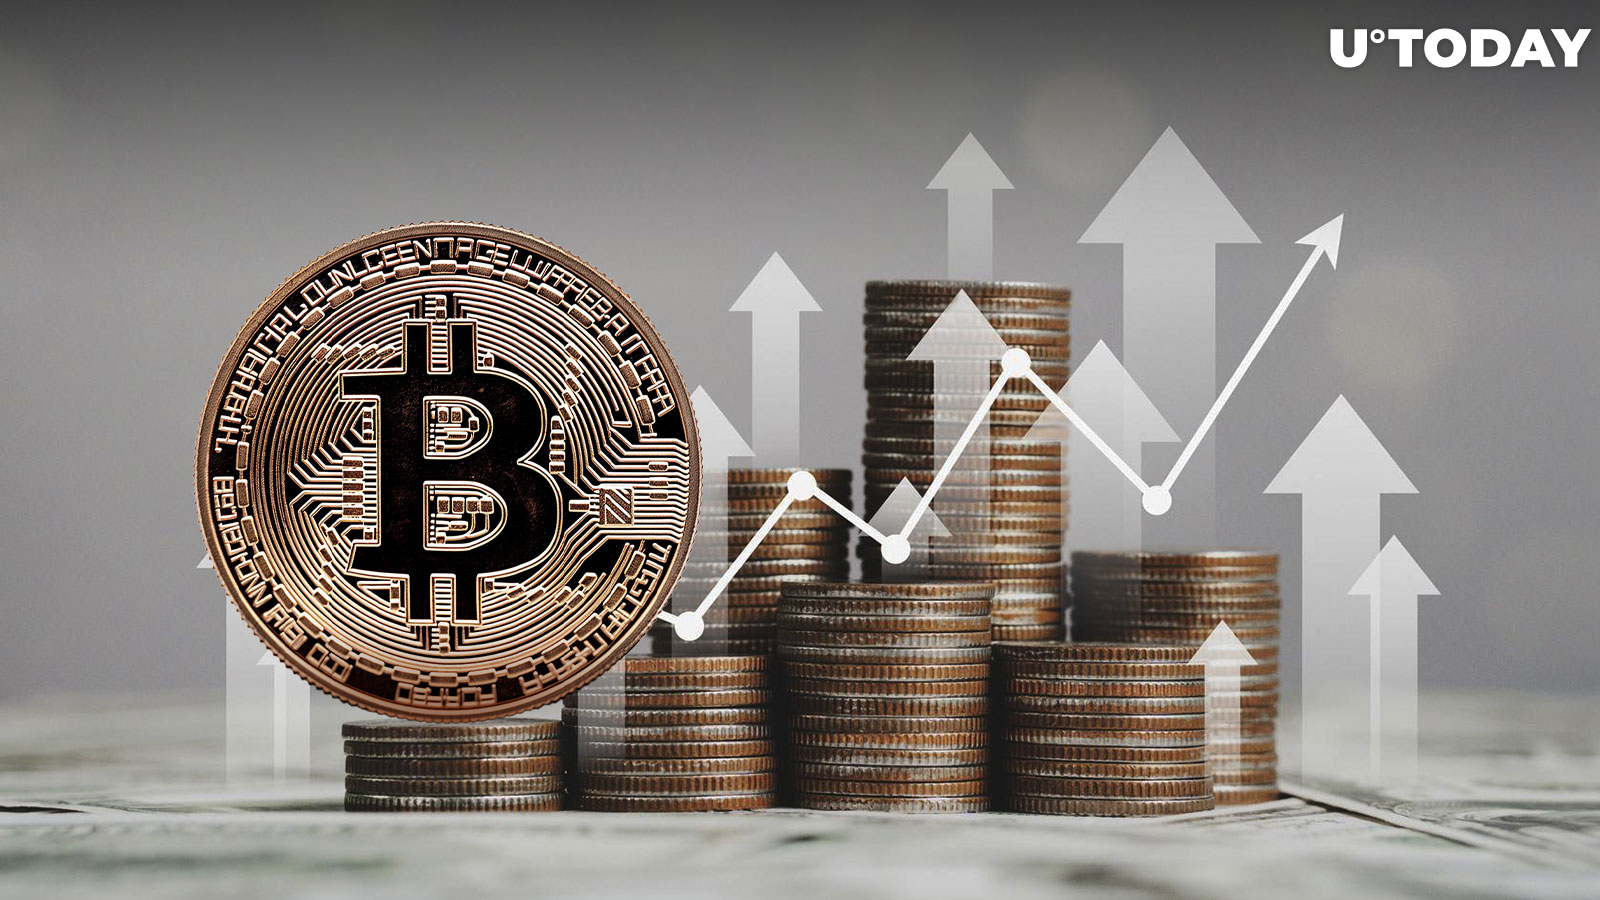 How Does Bitcoin Price Historically Move 1 Month Prior to Halving?